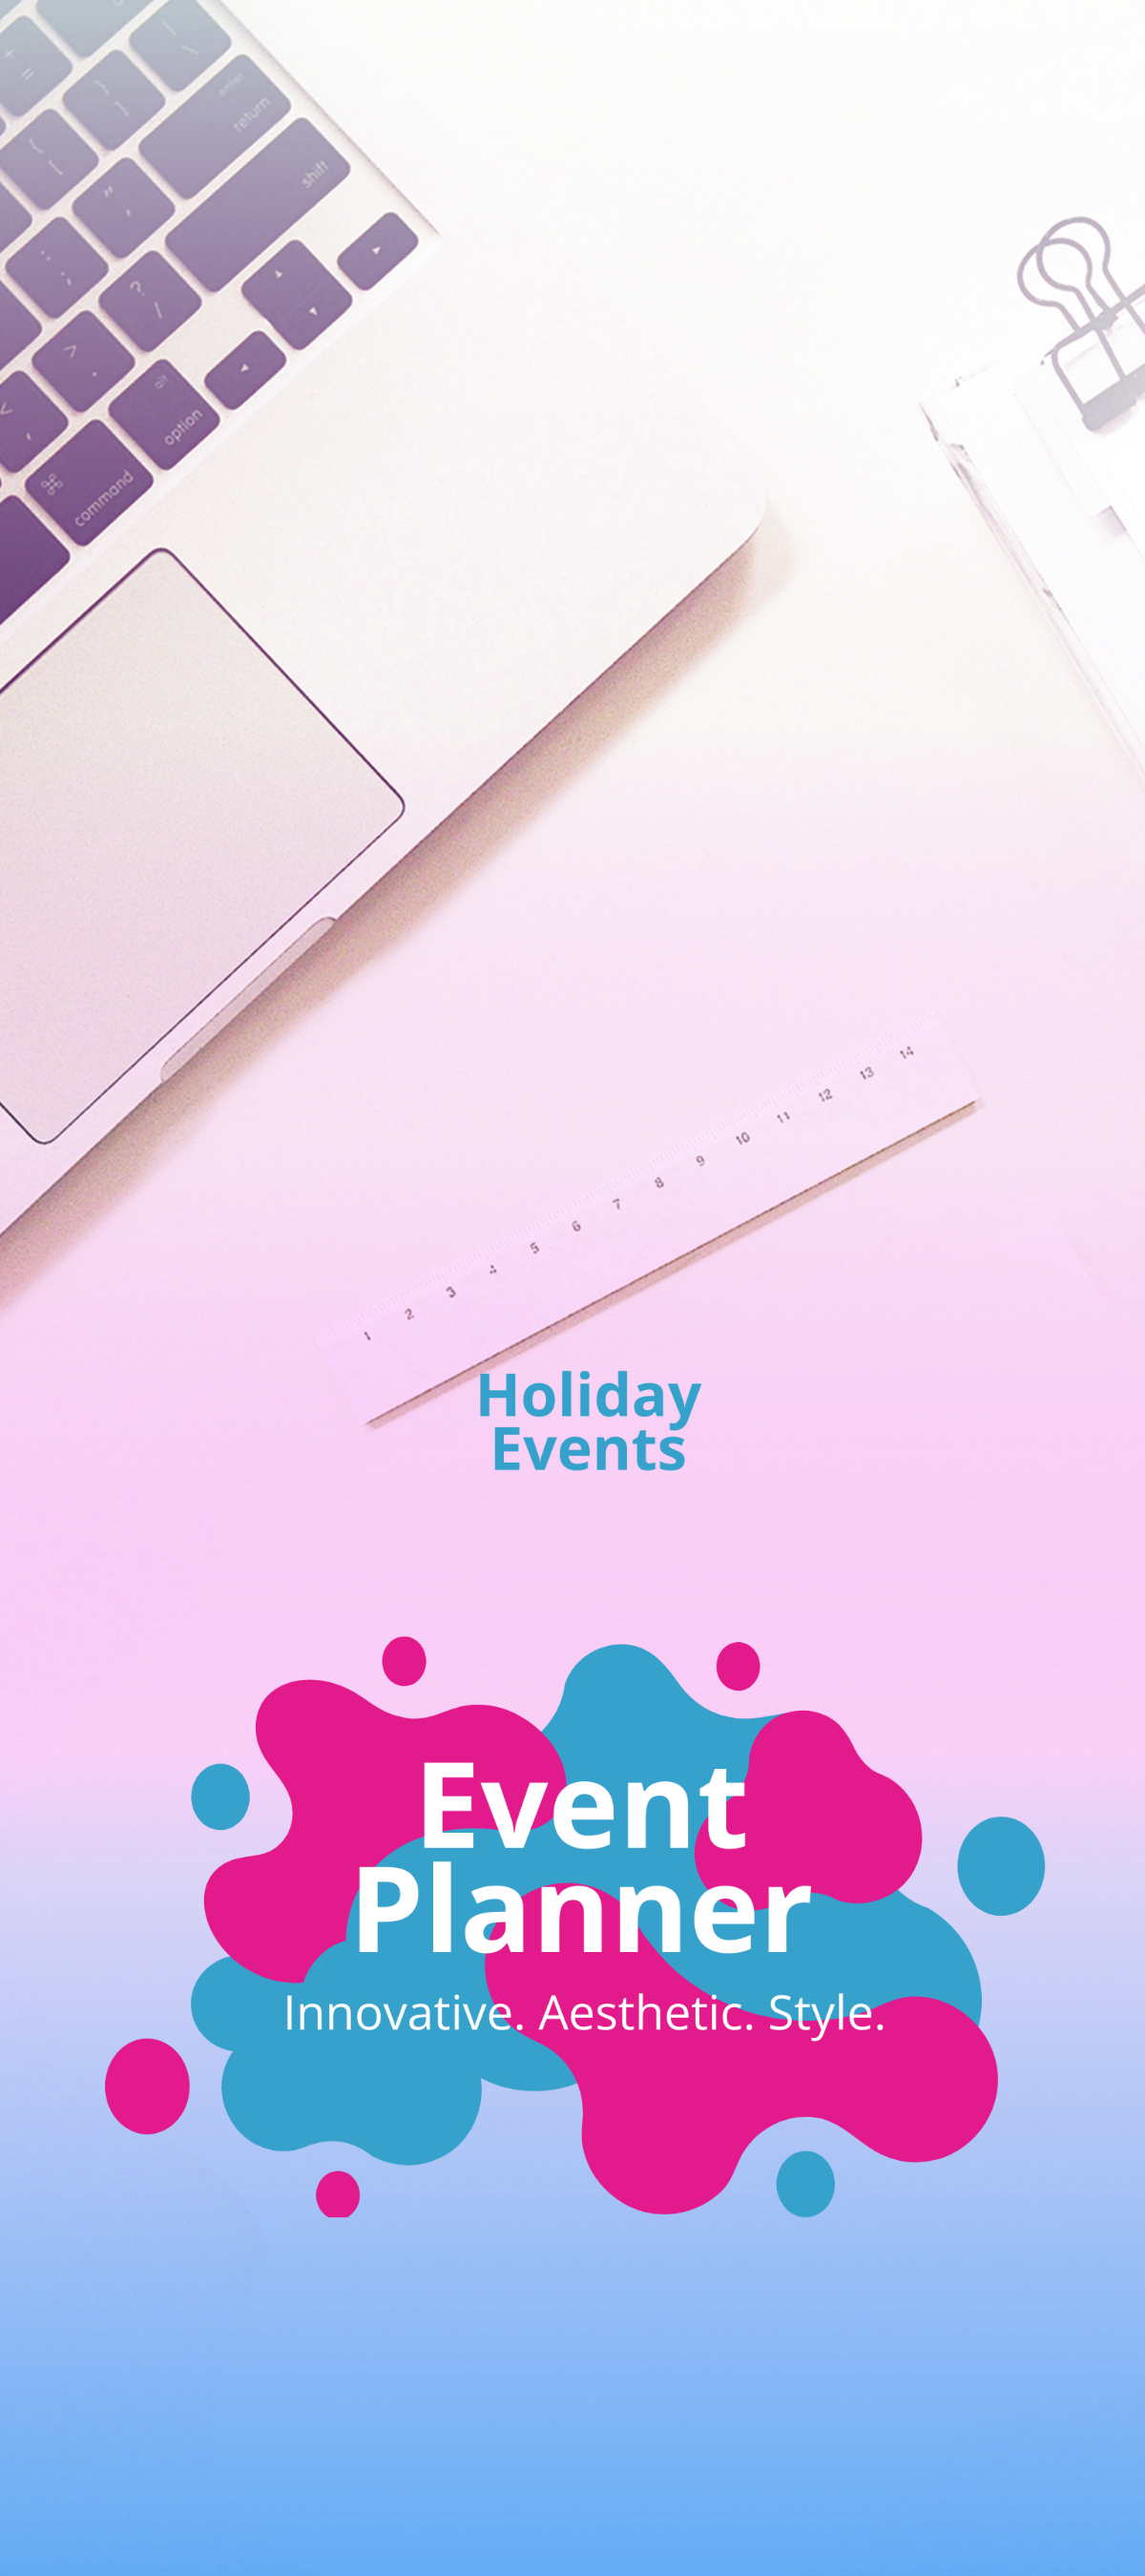 Free Event Planner DL Card Template